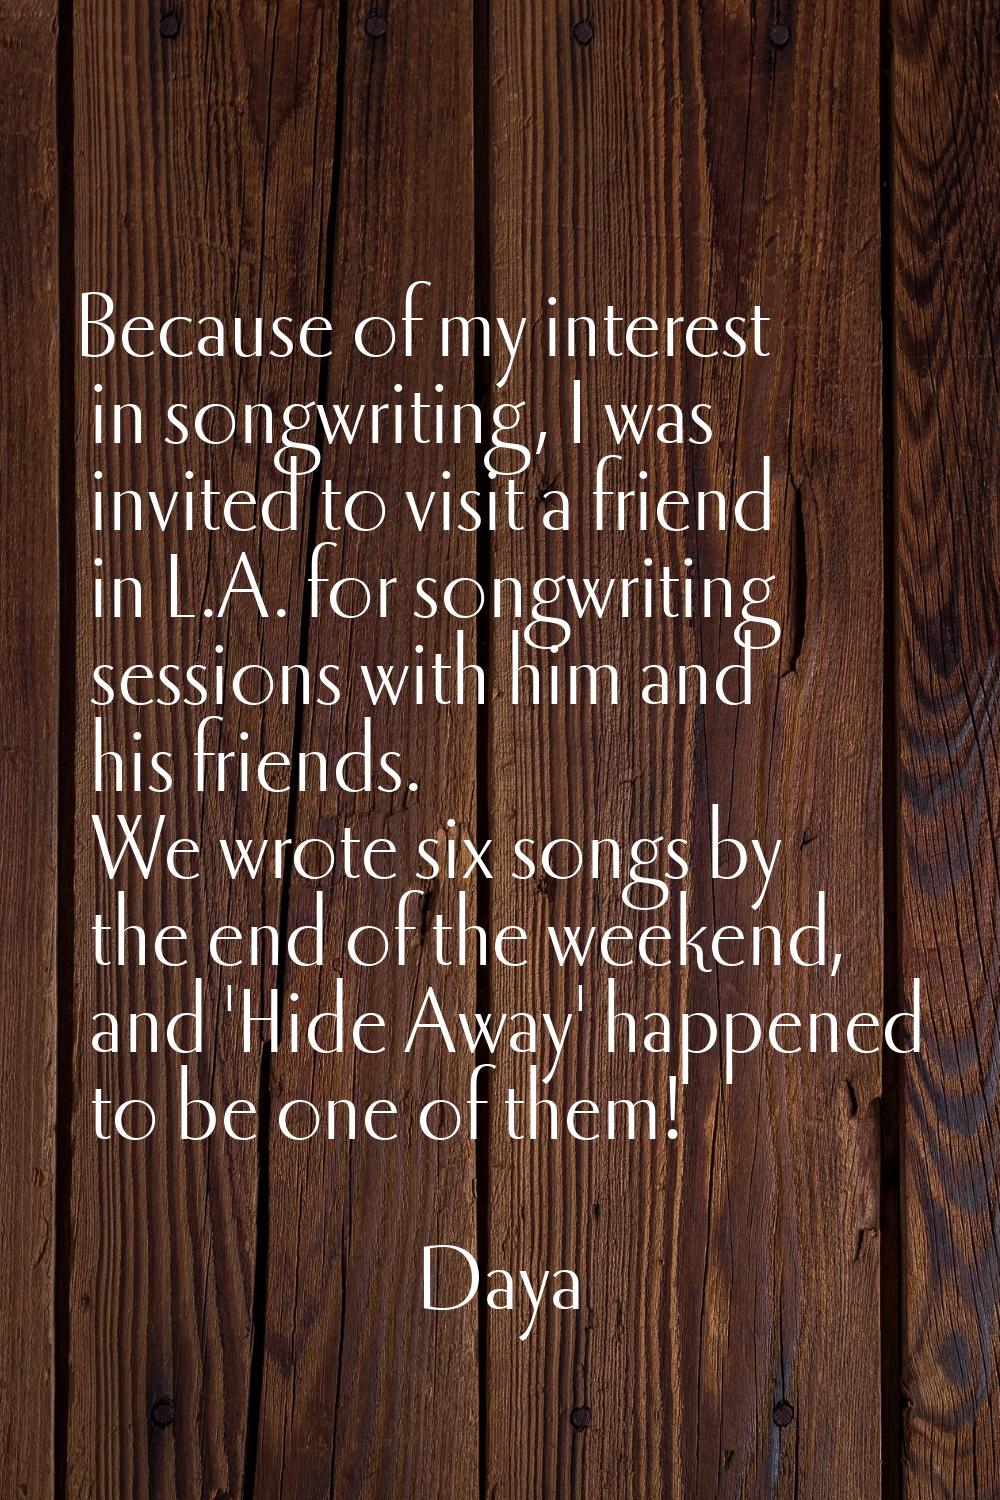 Because of my interest in songwriting, I was invited to visit a friend in L.A. for songwriting sess